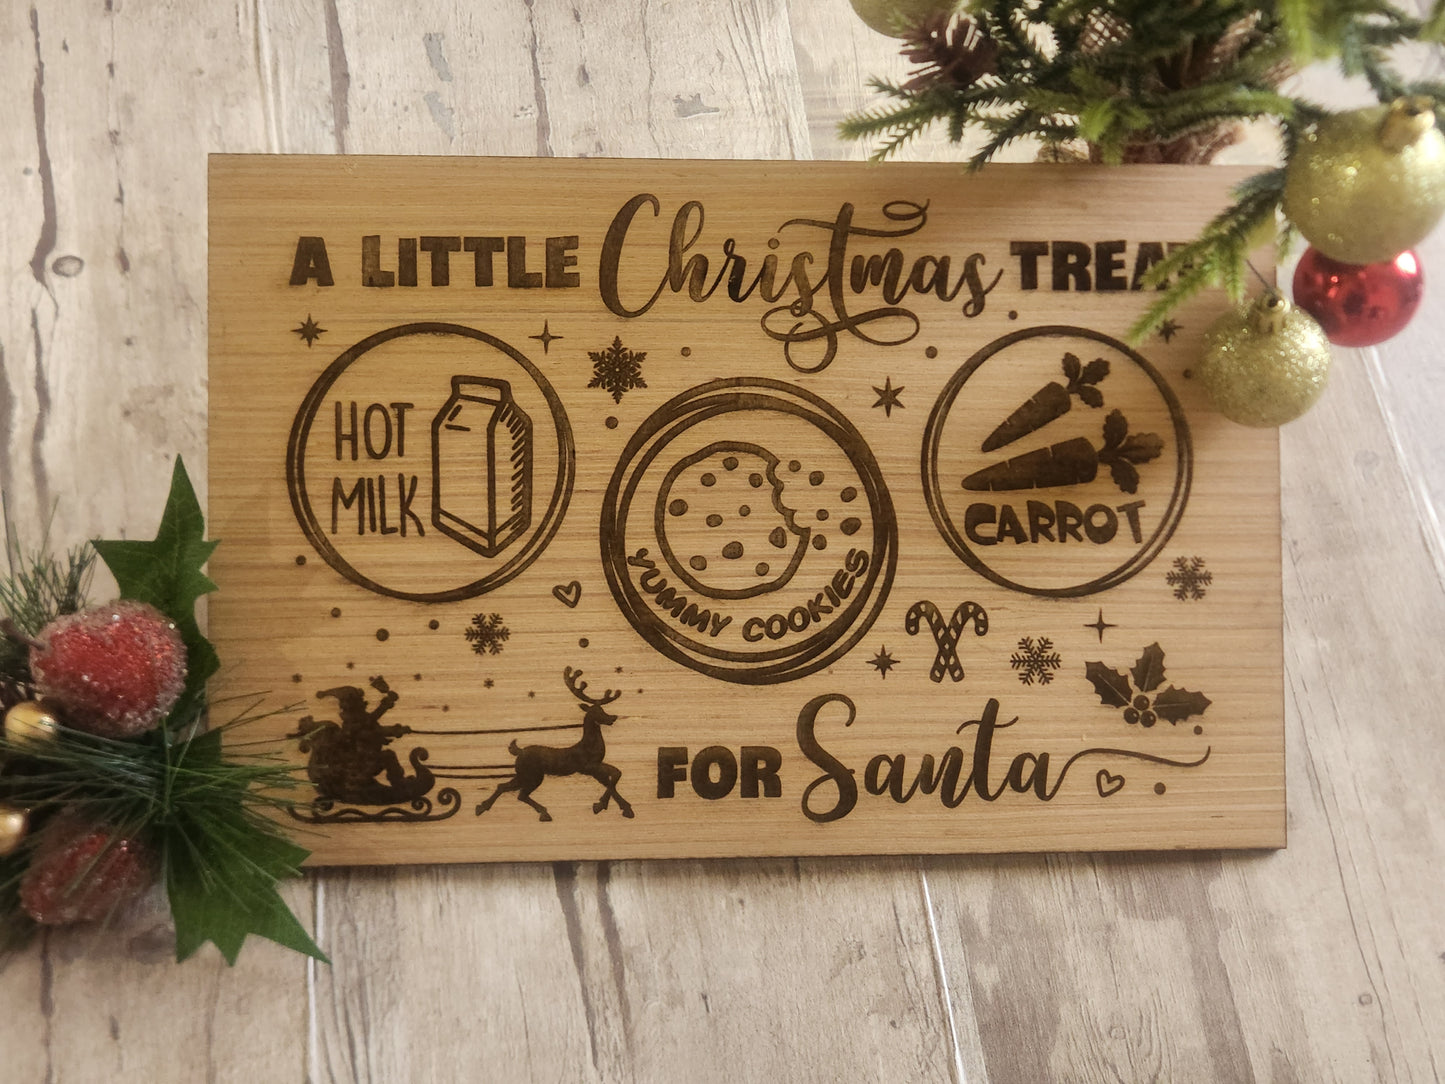 Santa Tray Able to be painted, stained or used as is